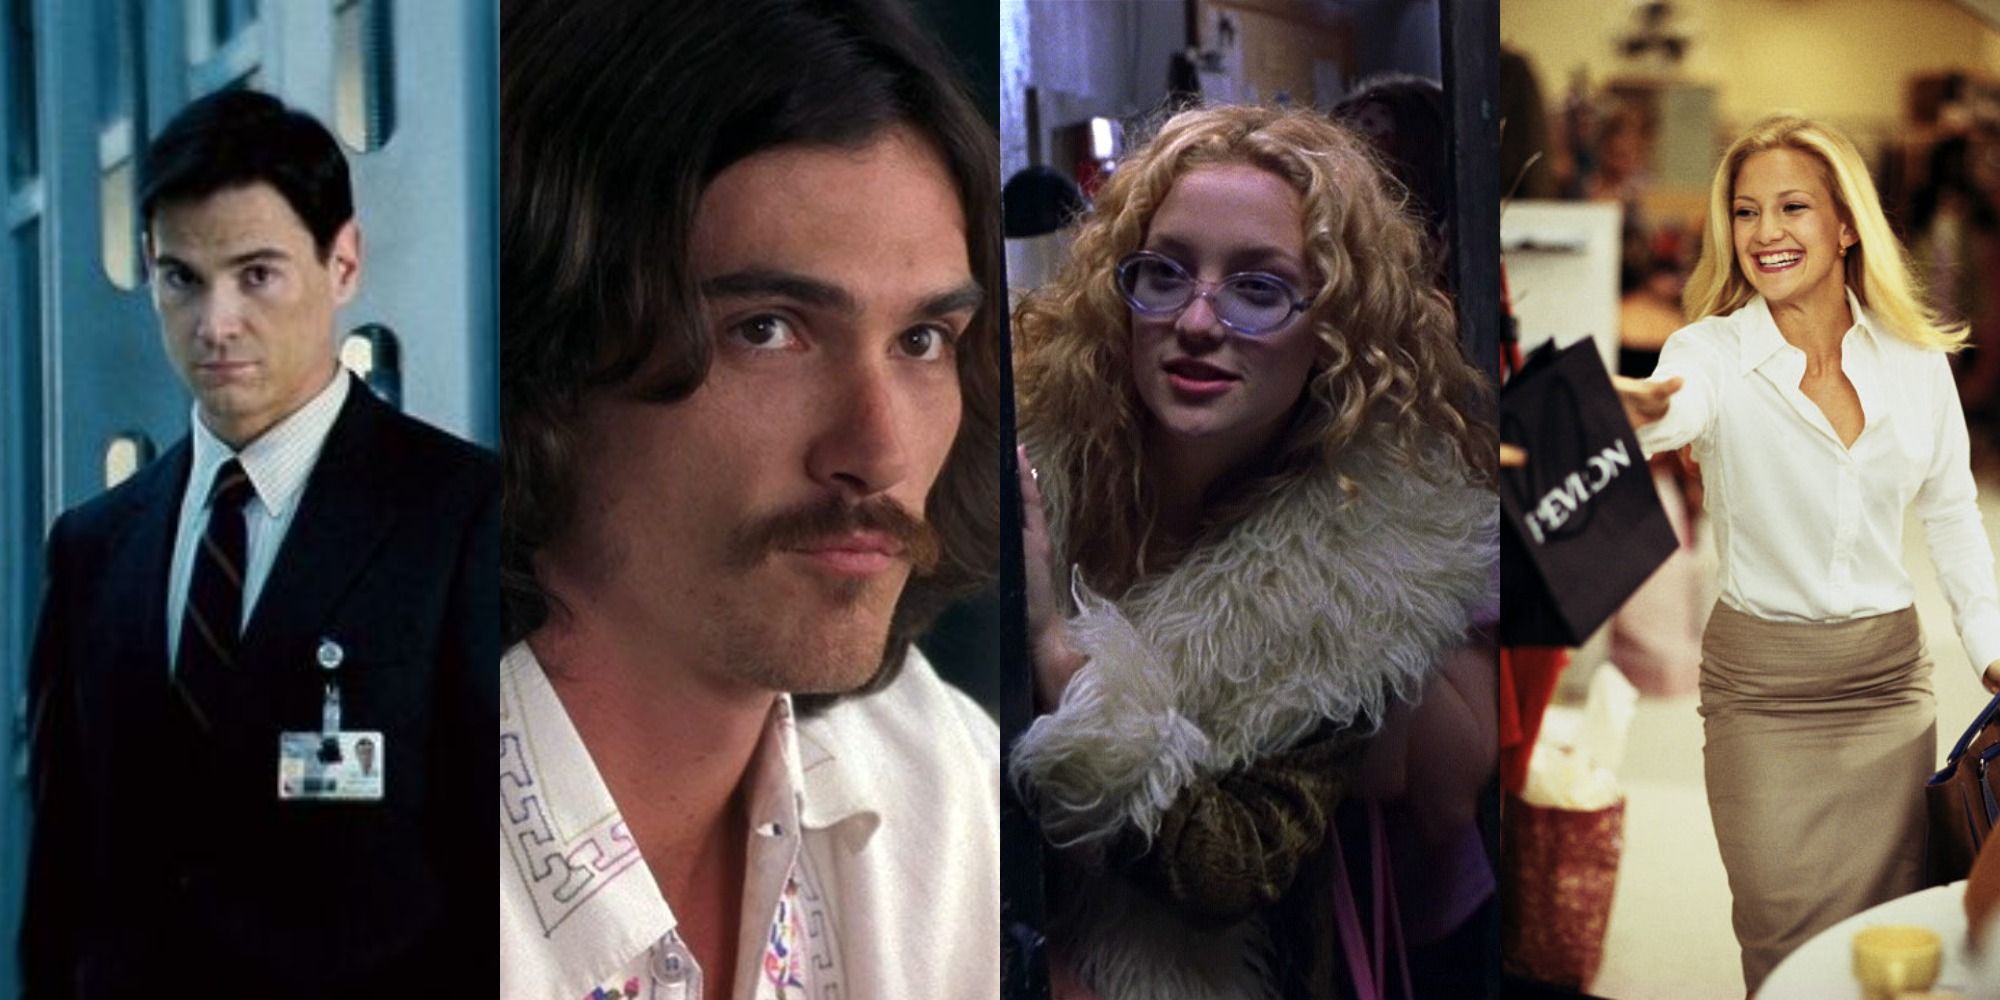 Four side by side images of Billy Crudup and Kate Hudson